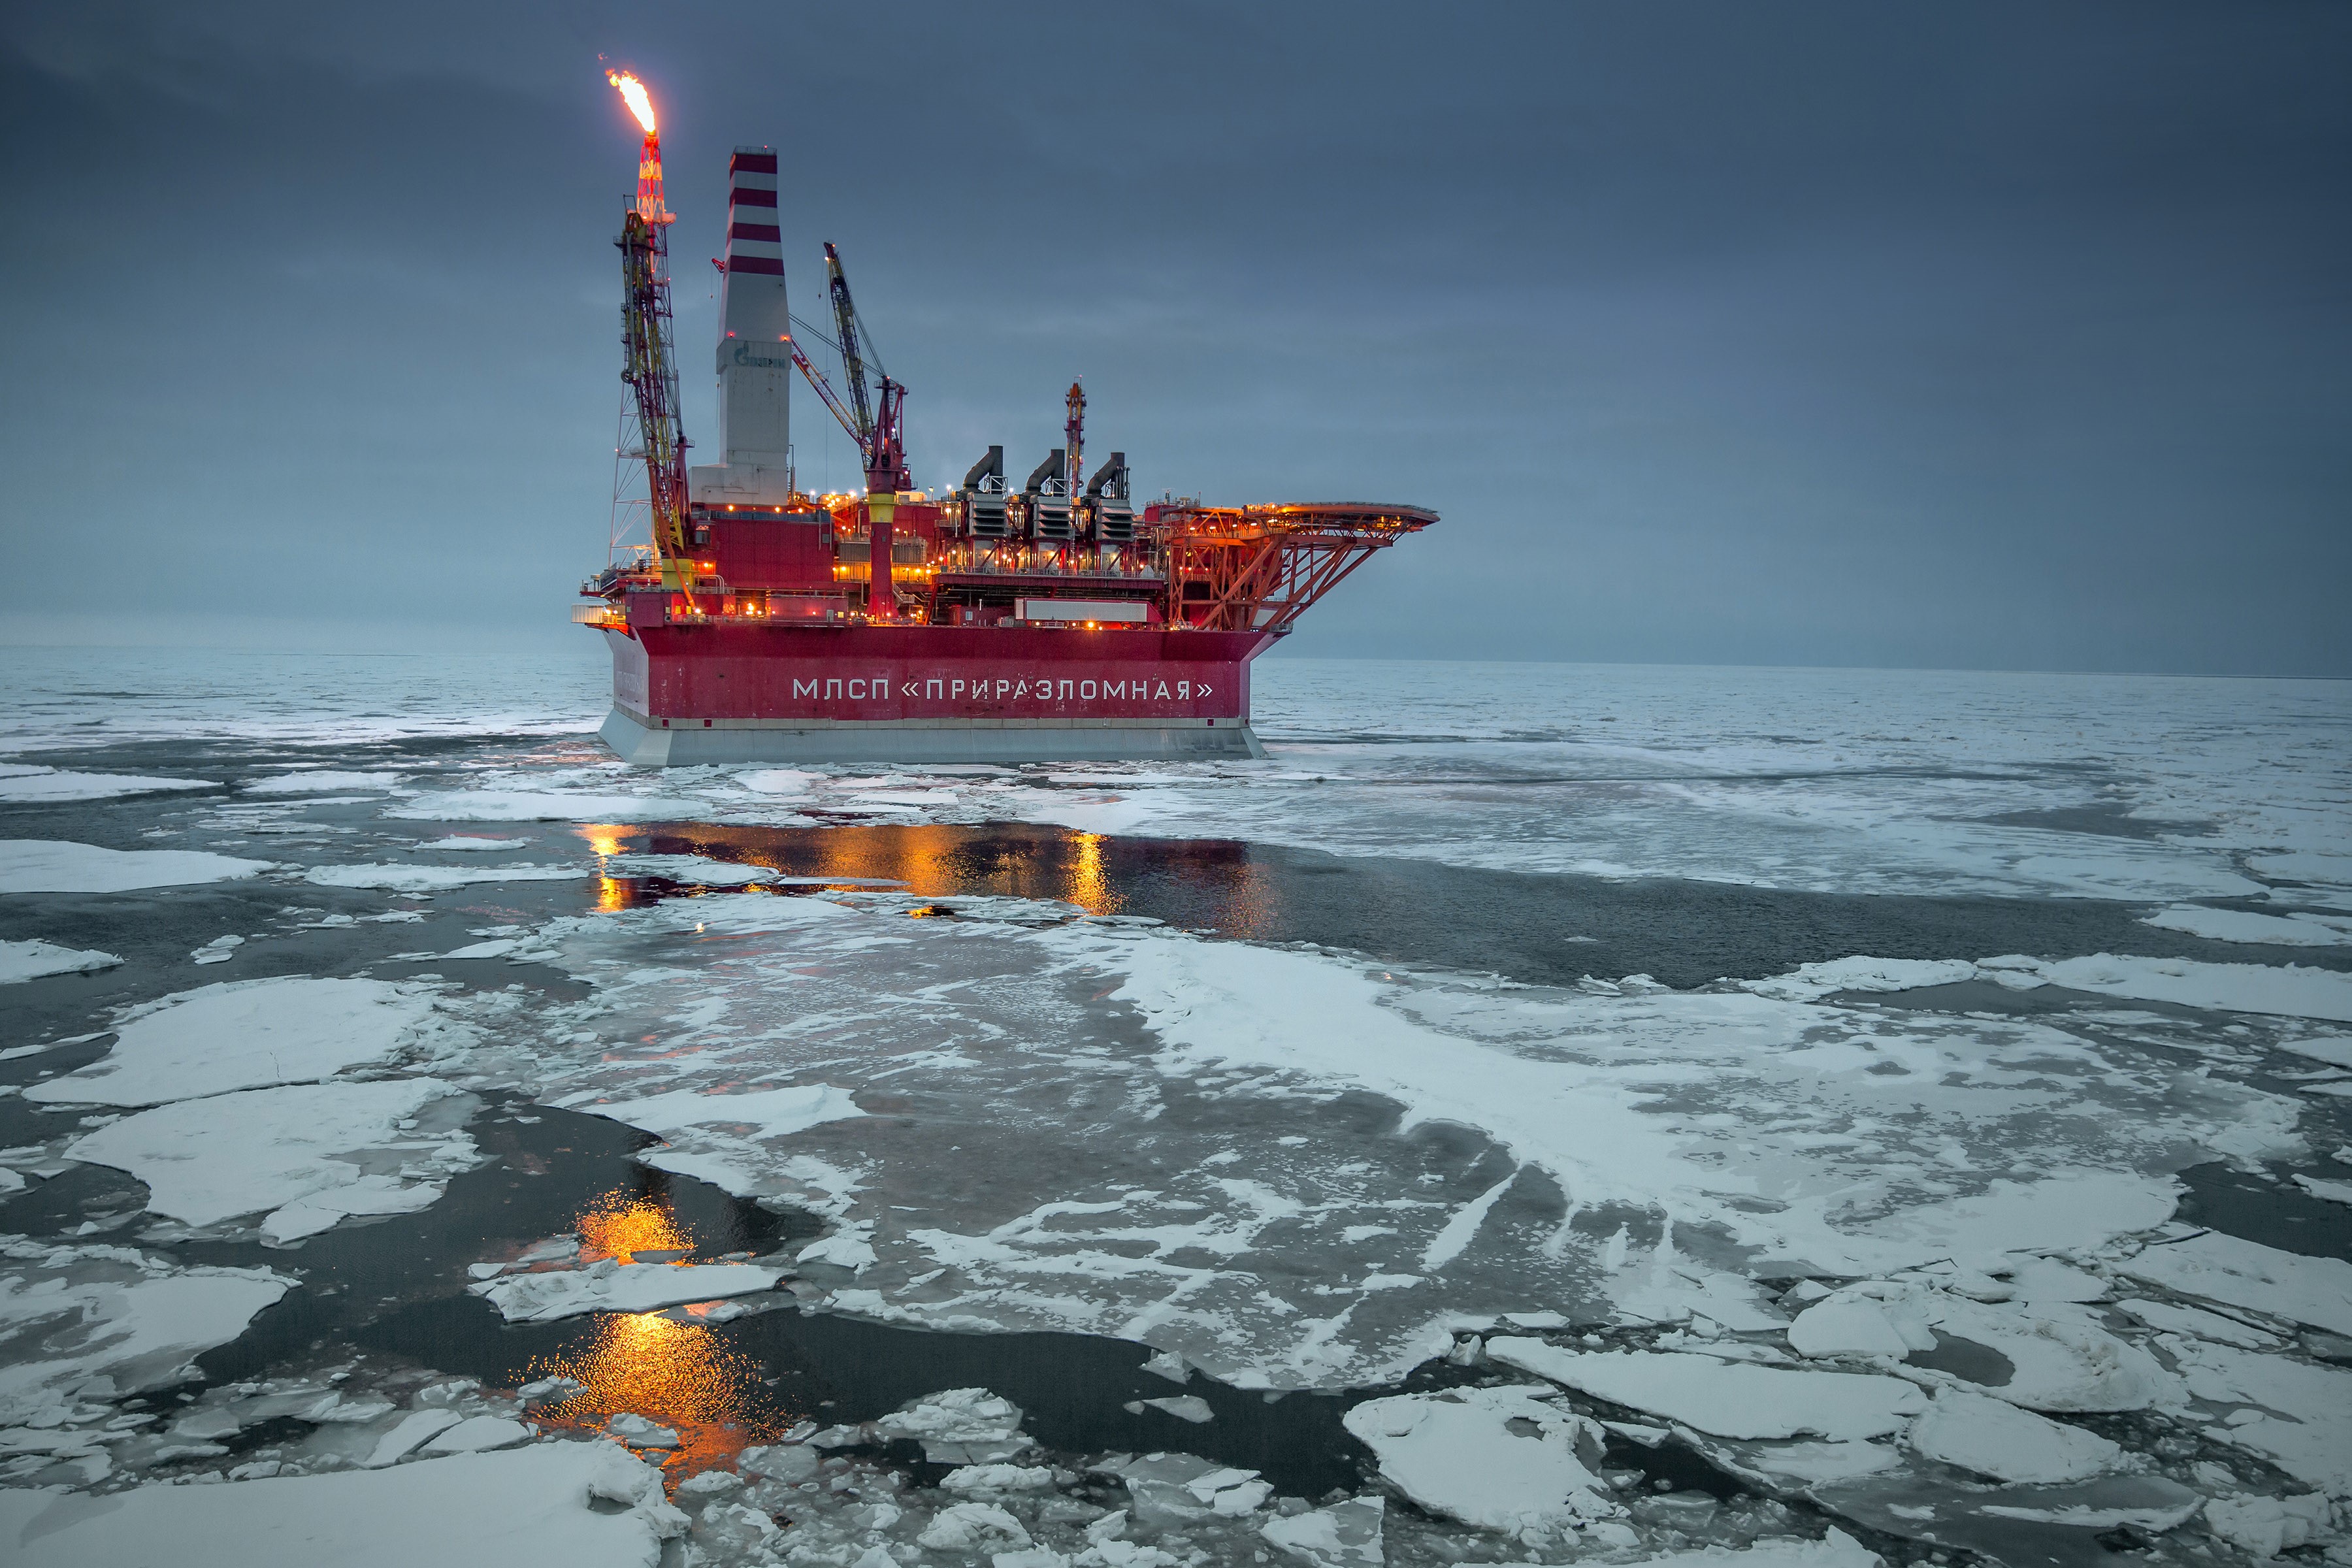 The Prirazlomnaya offshore ice-resistant oil-producing platform is seen in the Pechora Sea, Russia, on May 8, 2016. It is the world's first operational Arctic rig that processes oil drilling, production, storage, end product processing and loading. (Sergey Anisimov—Anadolu Agency/Getty Images)